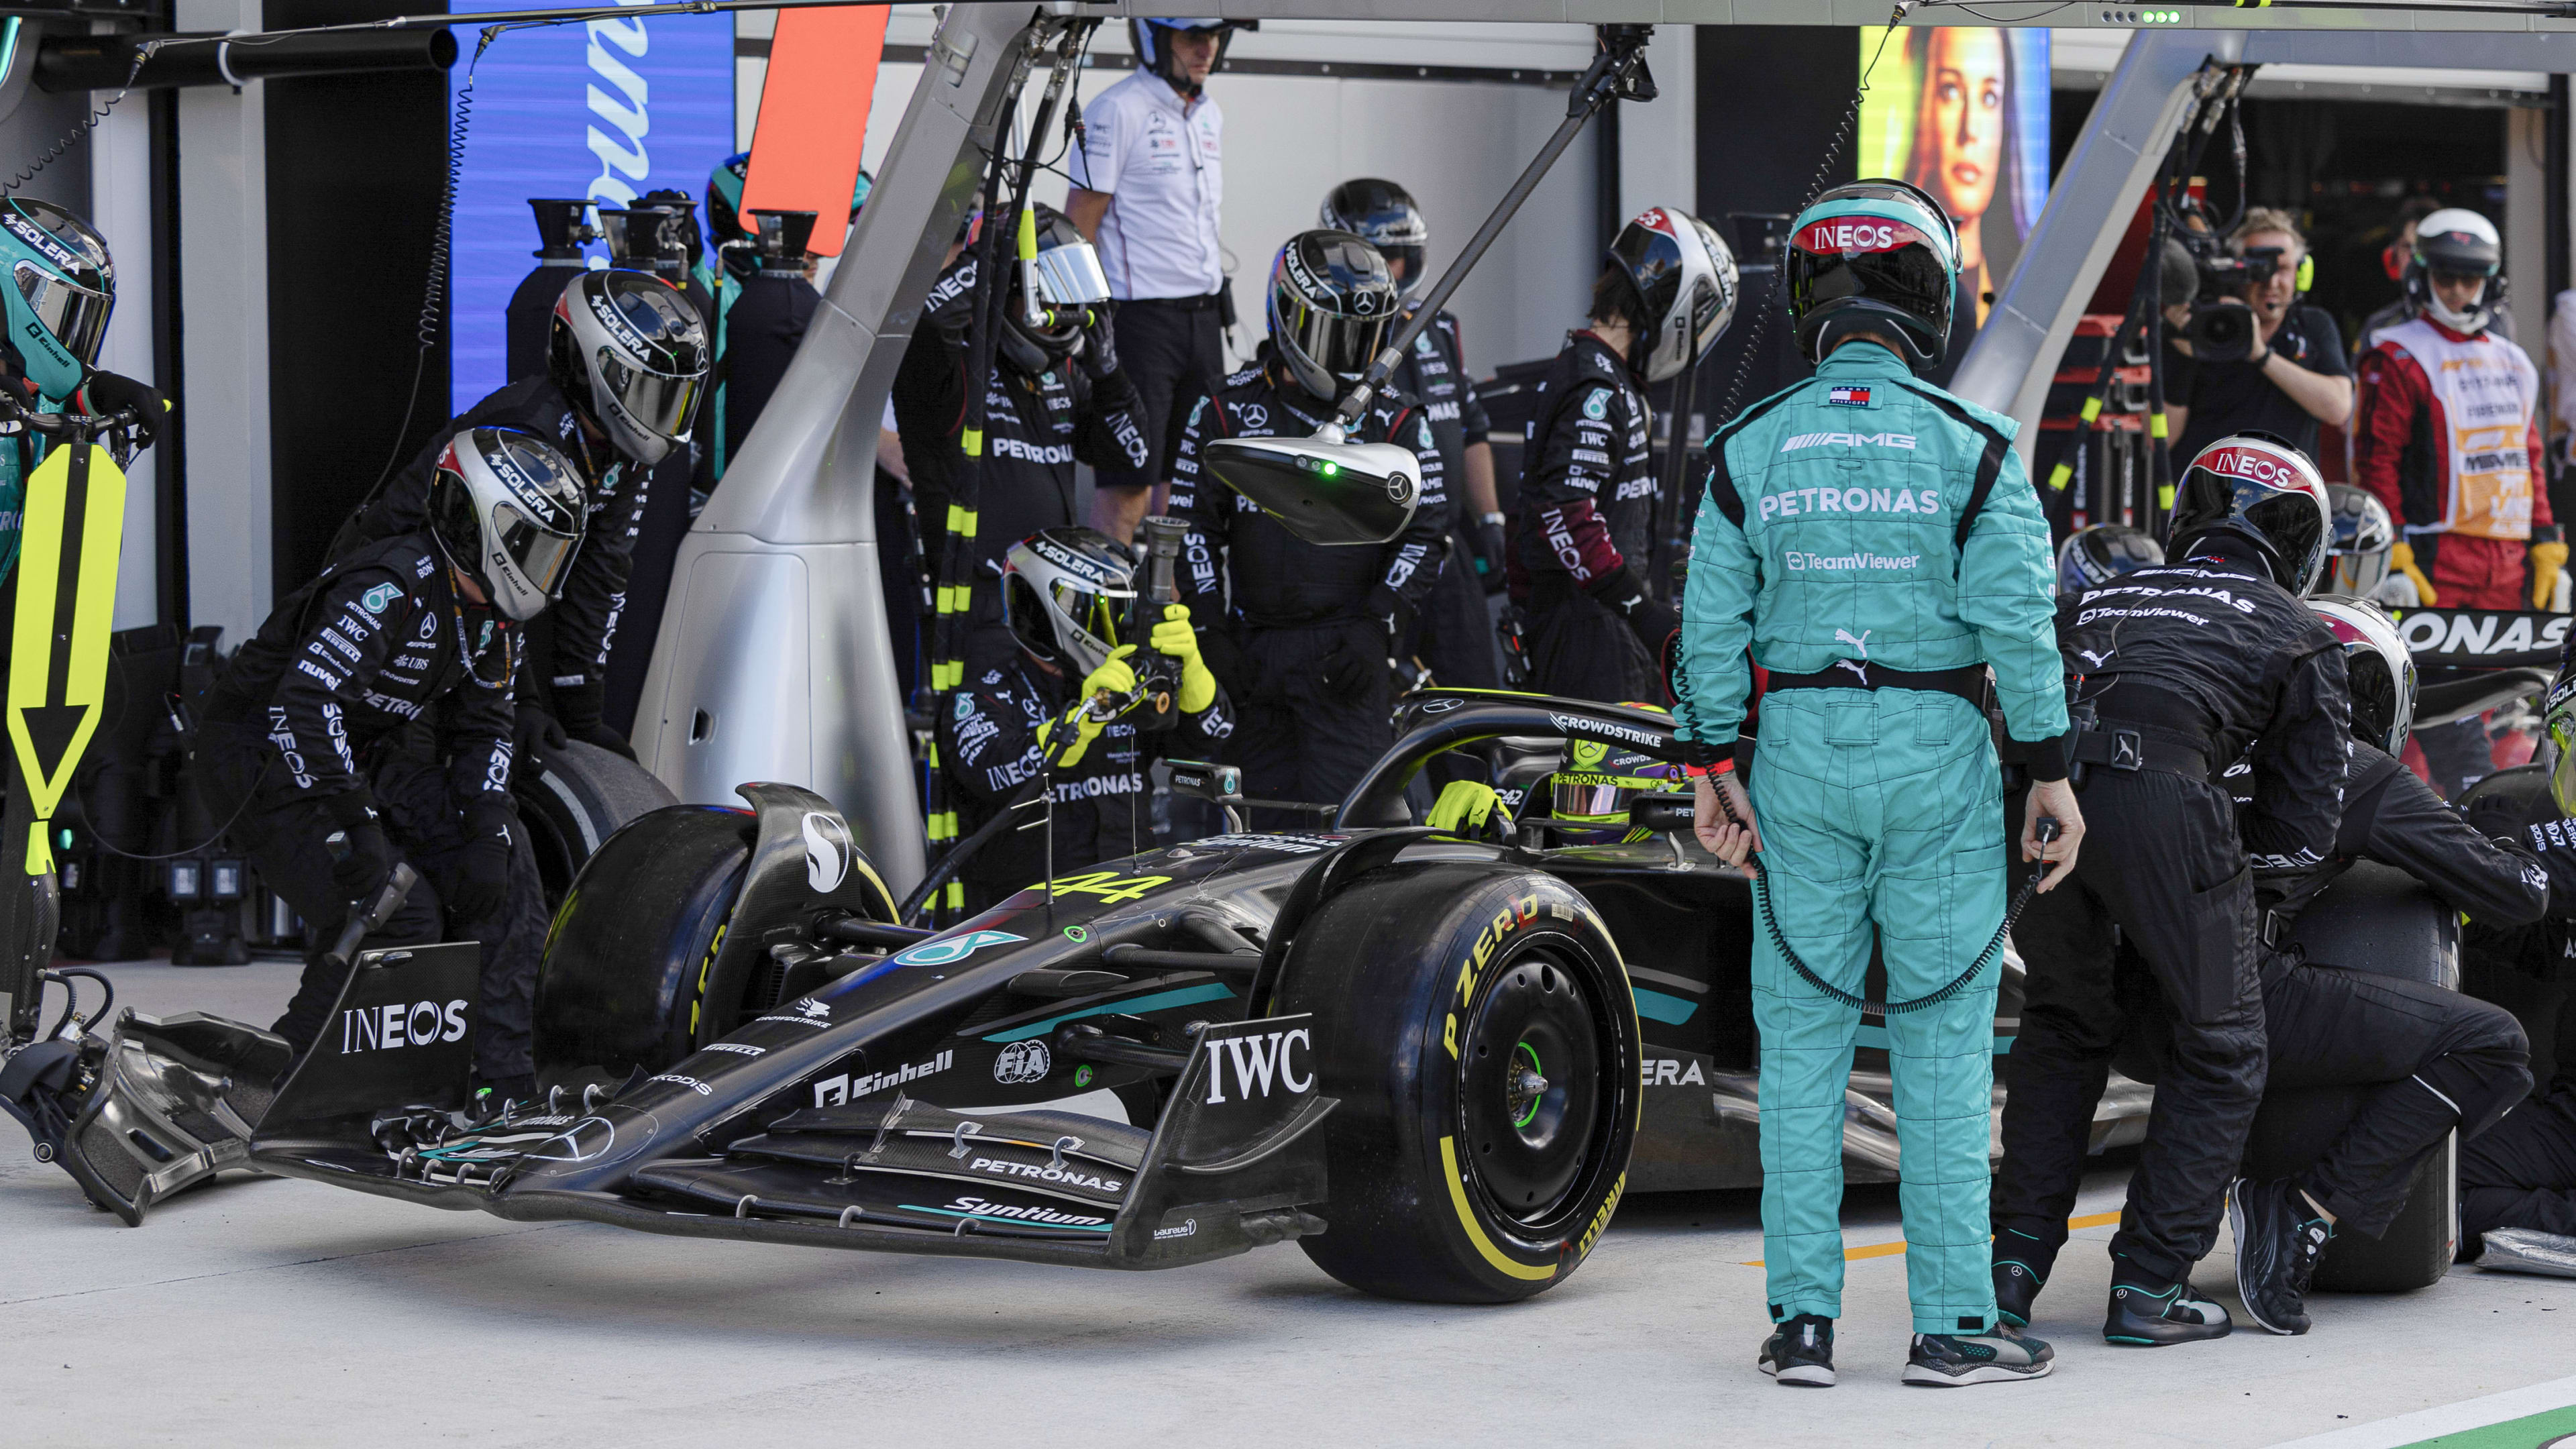 Mercedes explain first step Imola upgrades as they look to challenge Red Bull Formula 1®